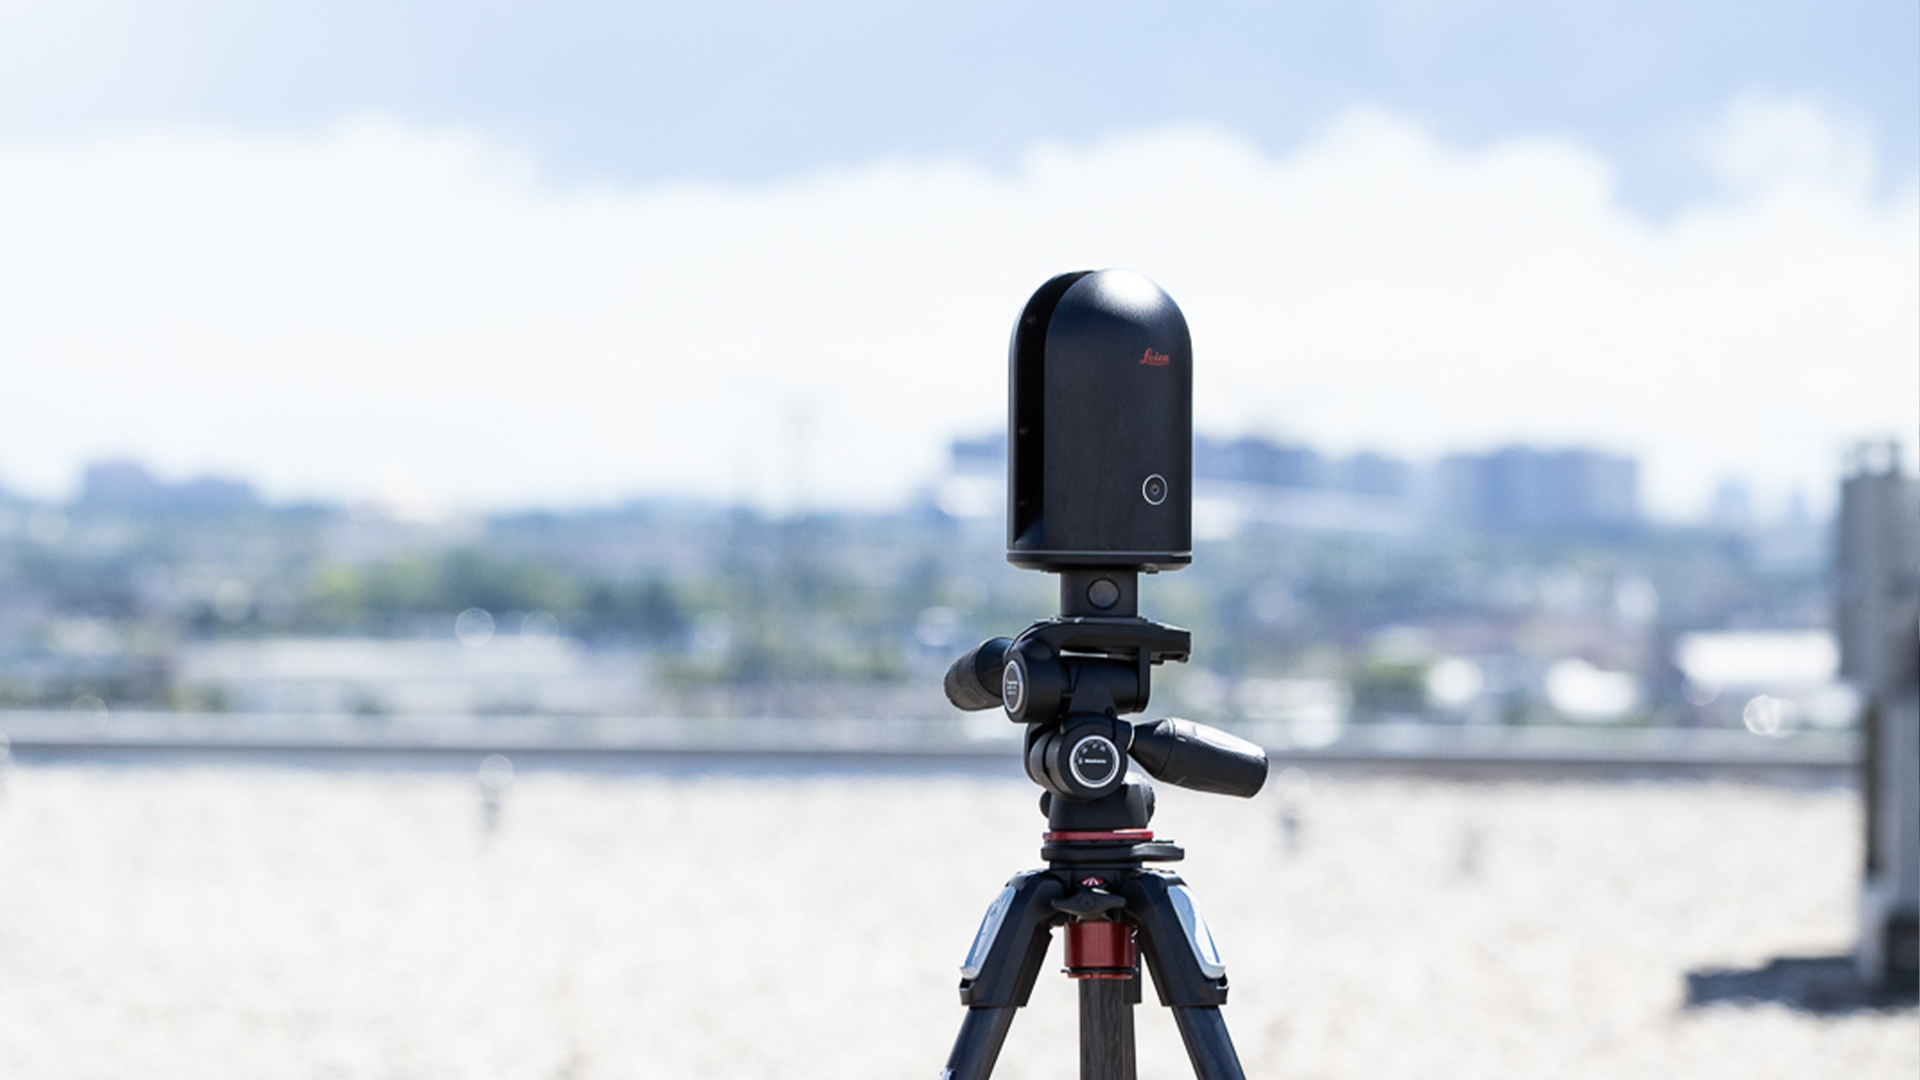 A Leica Geosytems BLK360 Laser Scanner on top of a building in Toronto, Canada.